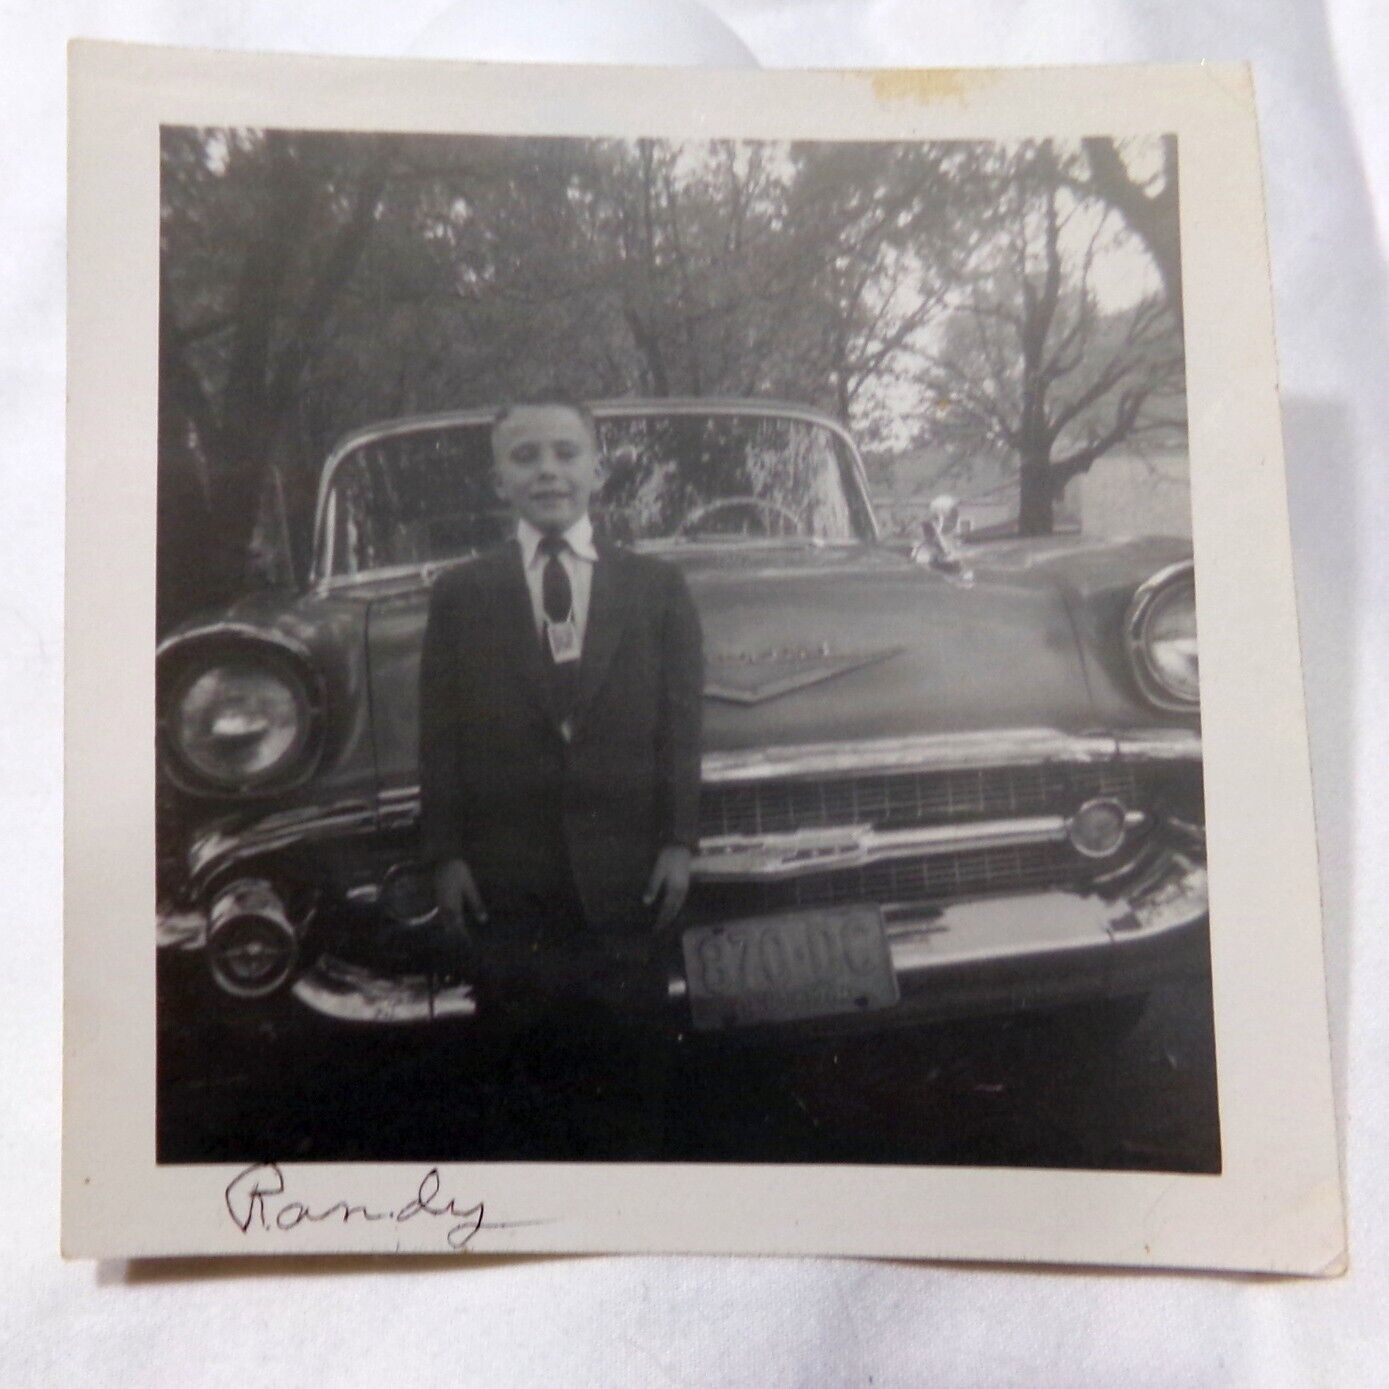 Lot of 9 Polaroid Photos of OLD CARS w/ PEOPLE B/W Couples Children Families